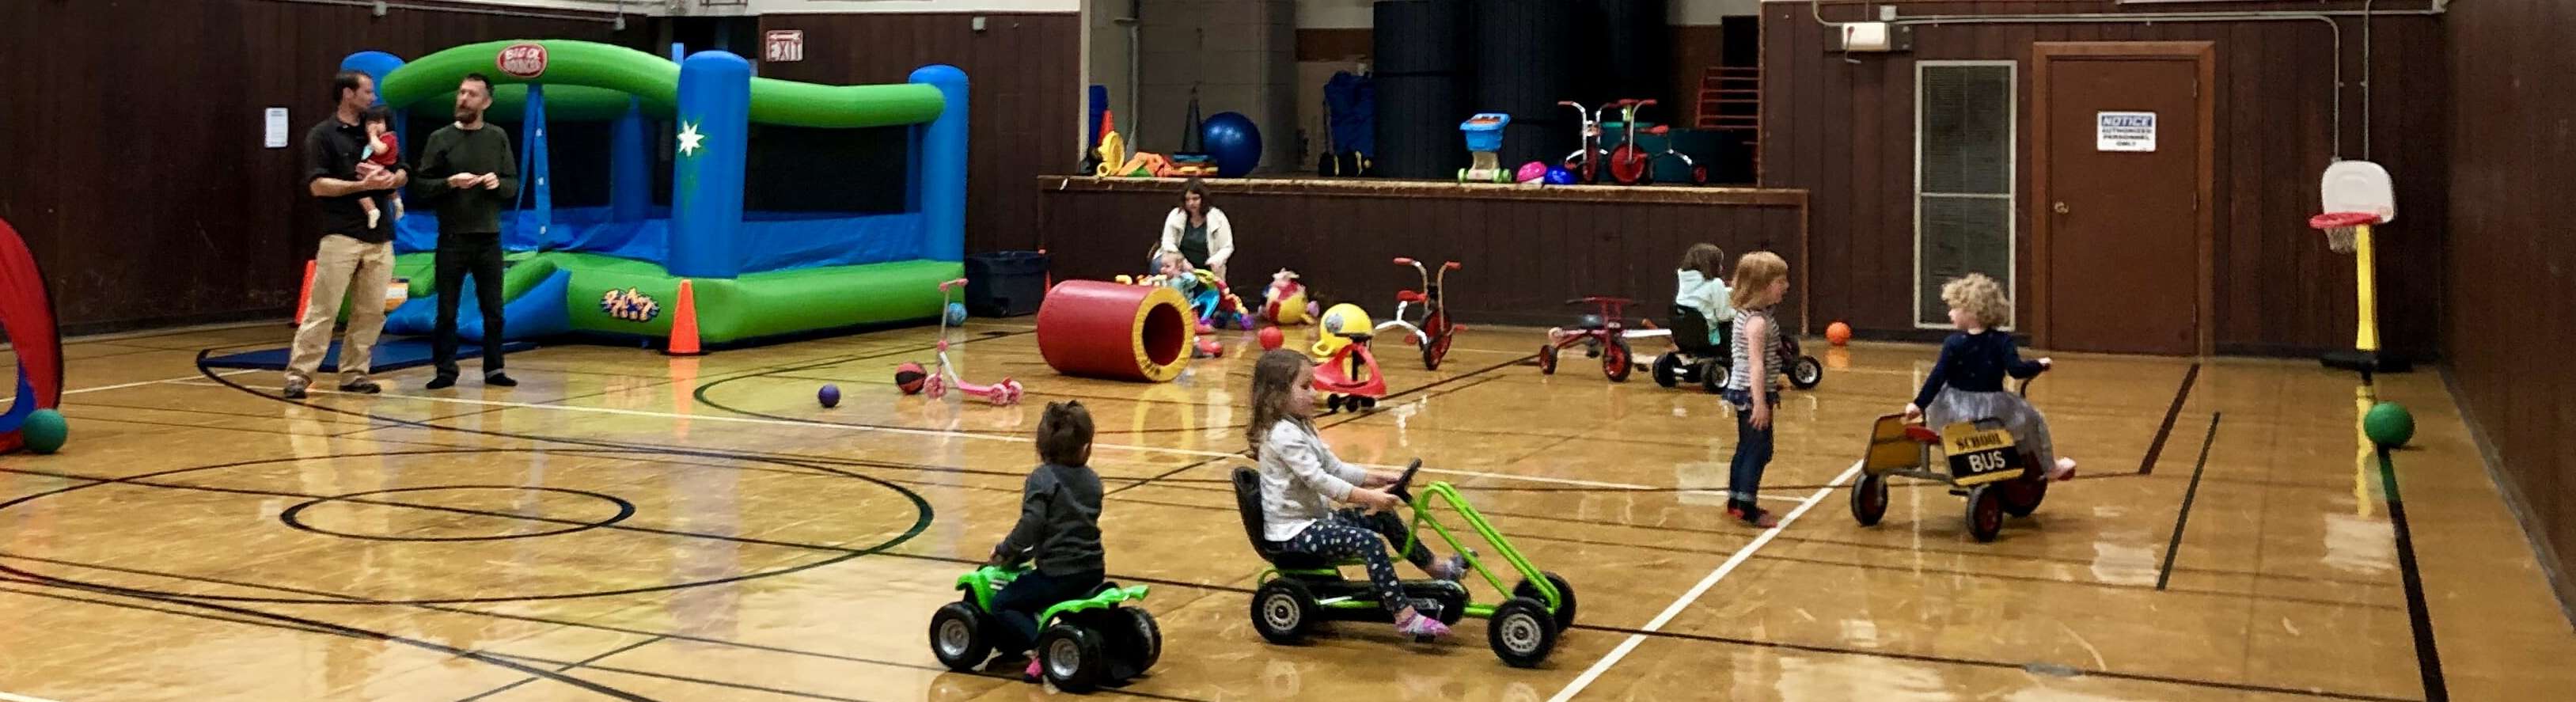 Kids playing at Mount Jumbo Gym during a birthday party.